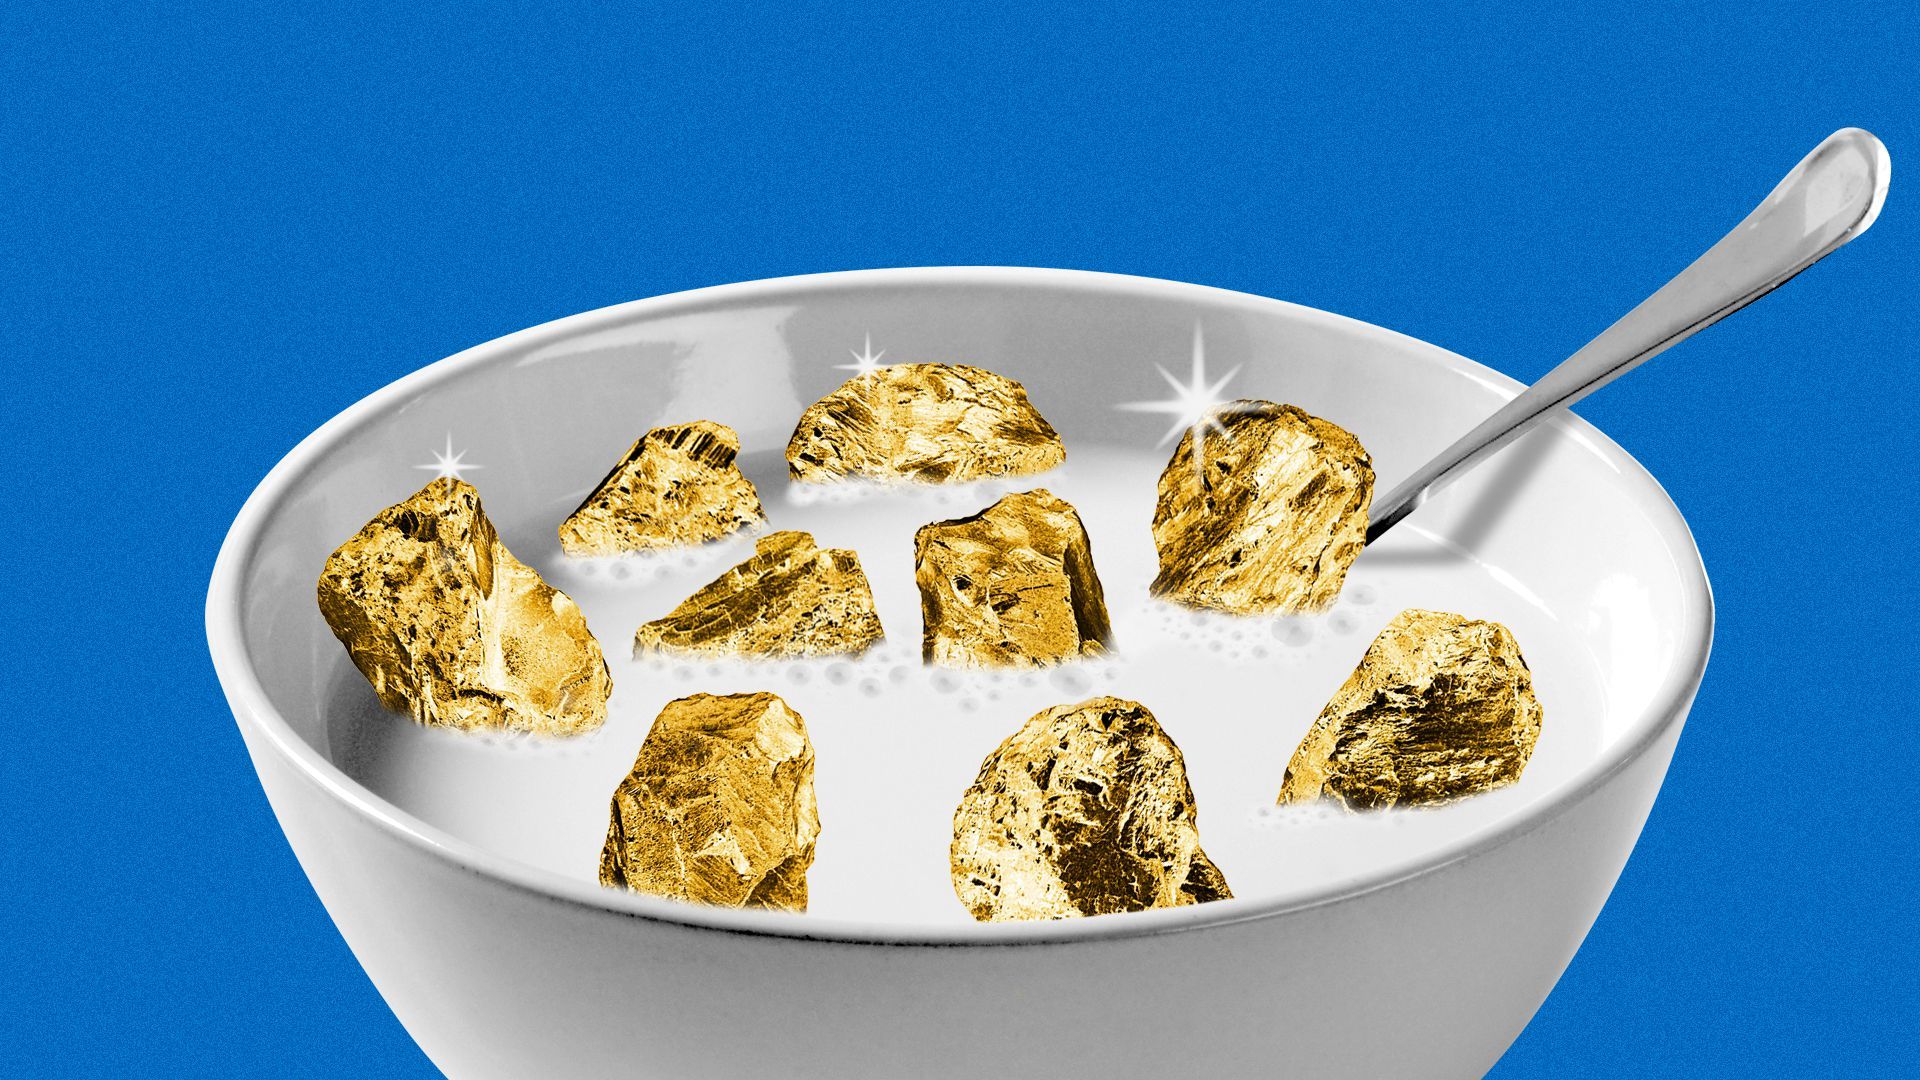 Illustration of a bowl of cereal with gold nuggets in it instead of cereal.